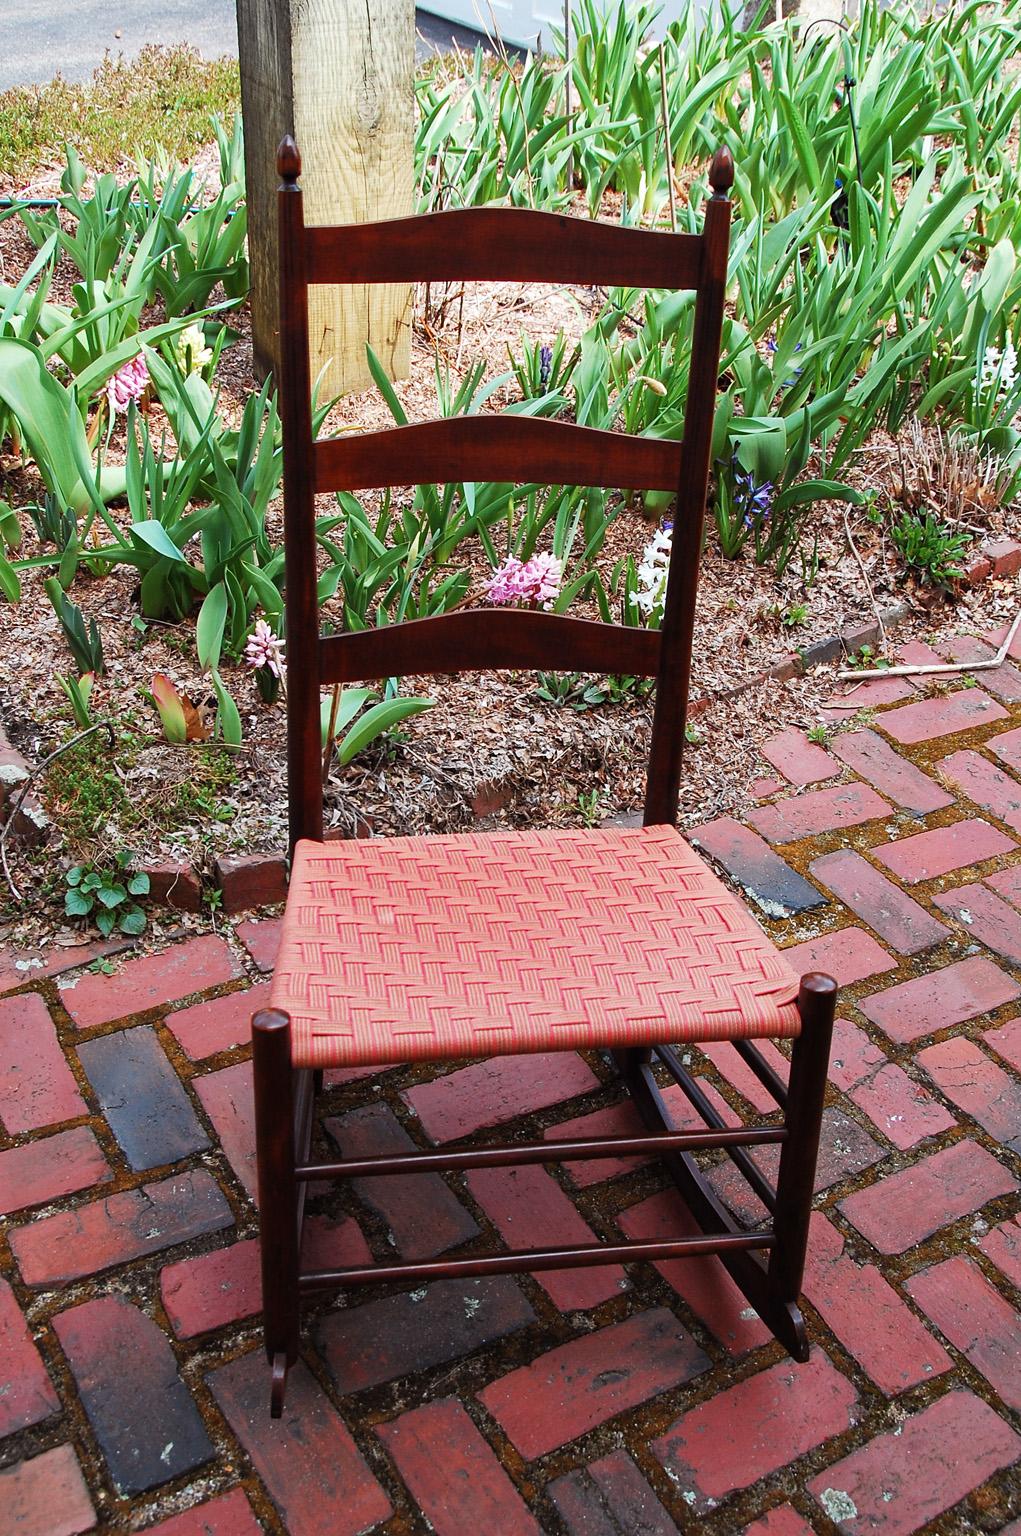 American Signed shaker maple rocking chair from the Community of shakers called the South Family, Mount Lebanon, New York. This chair has the original makers label stating Shaker's (sic) Mount Lebanon, NY; Style 3. Each of their chairs had a style